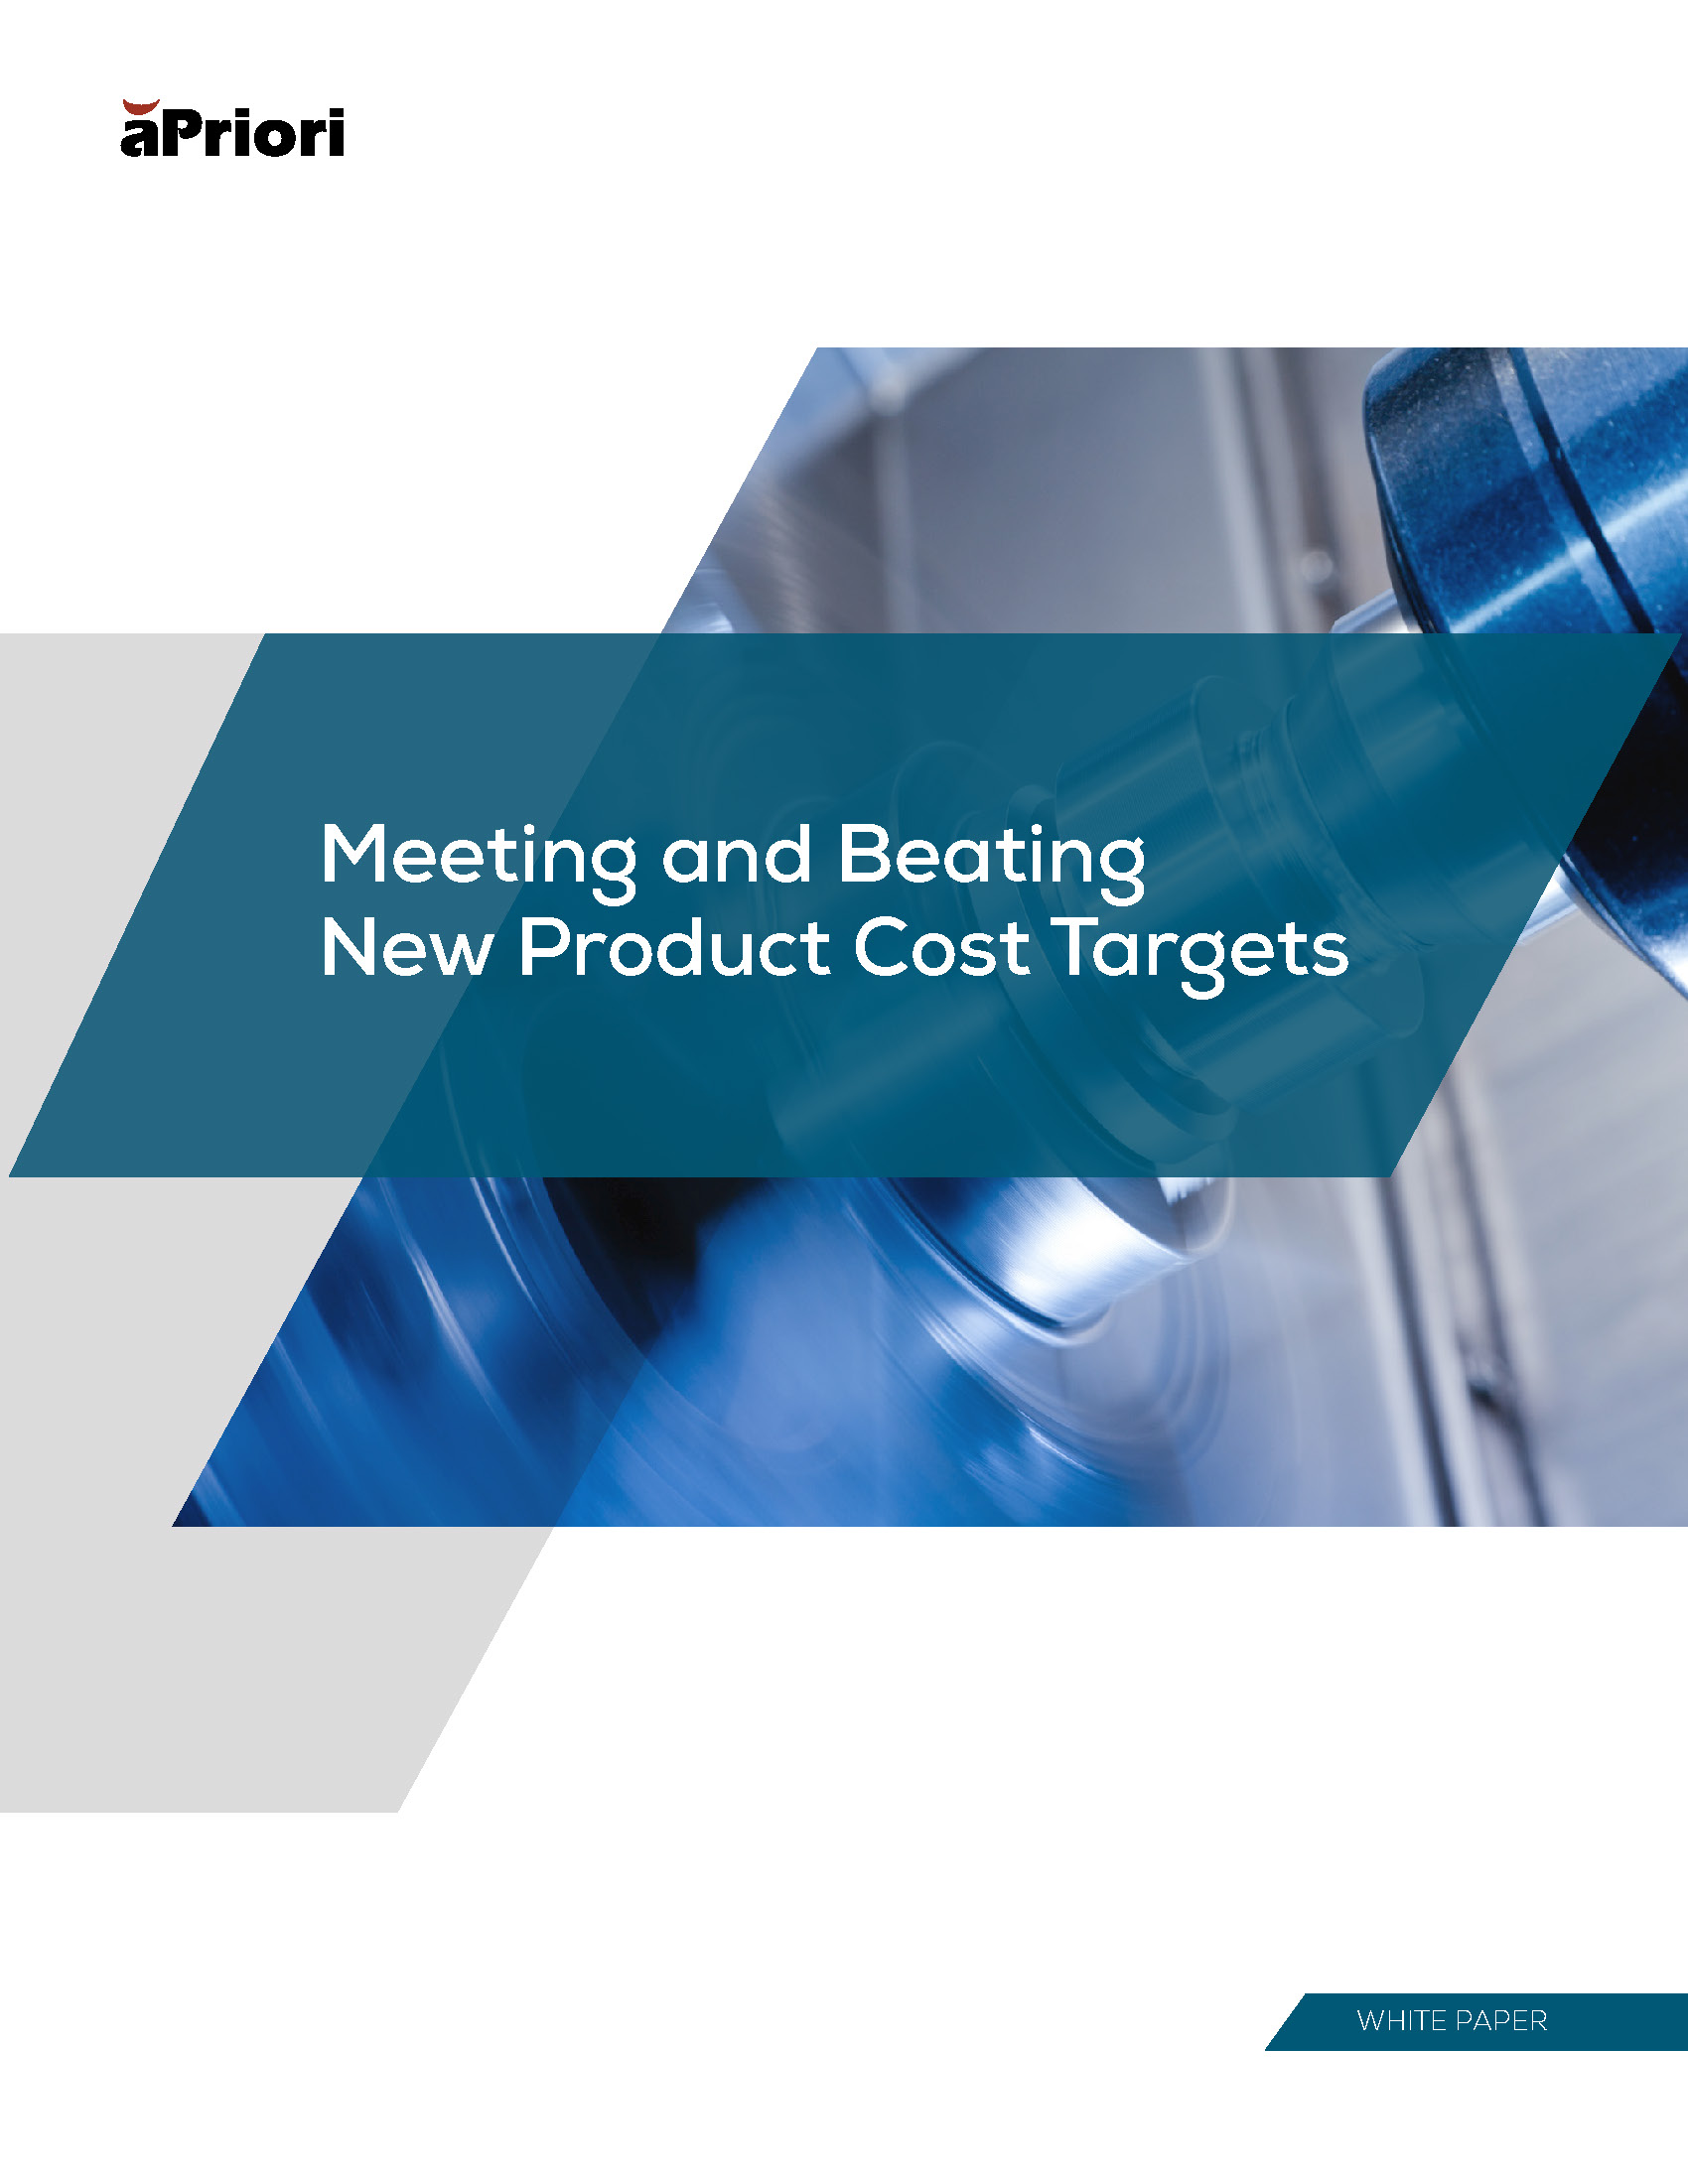 new product cost targets